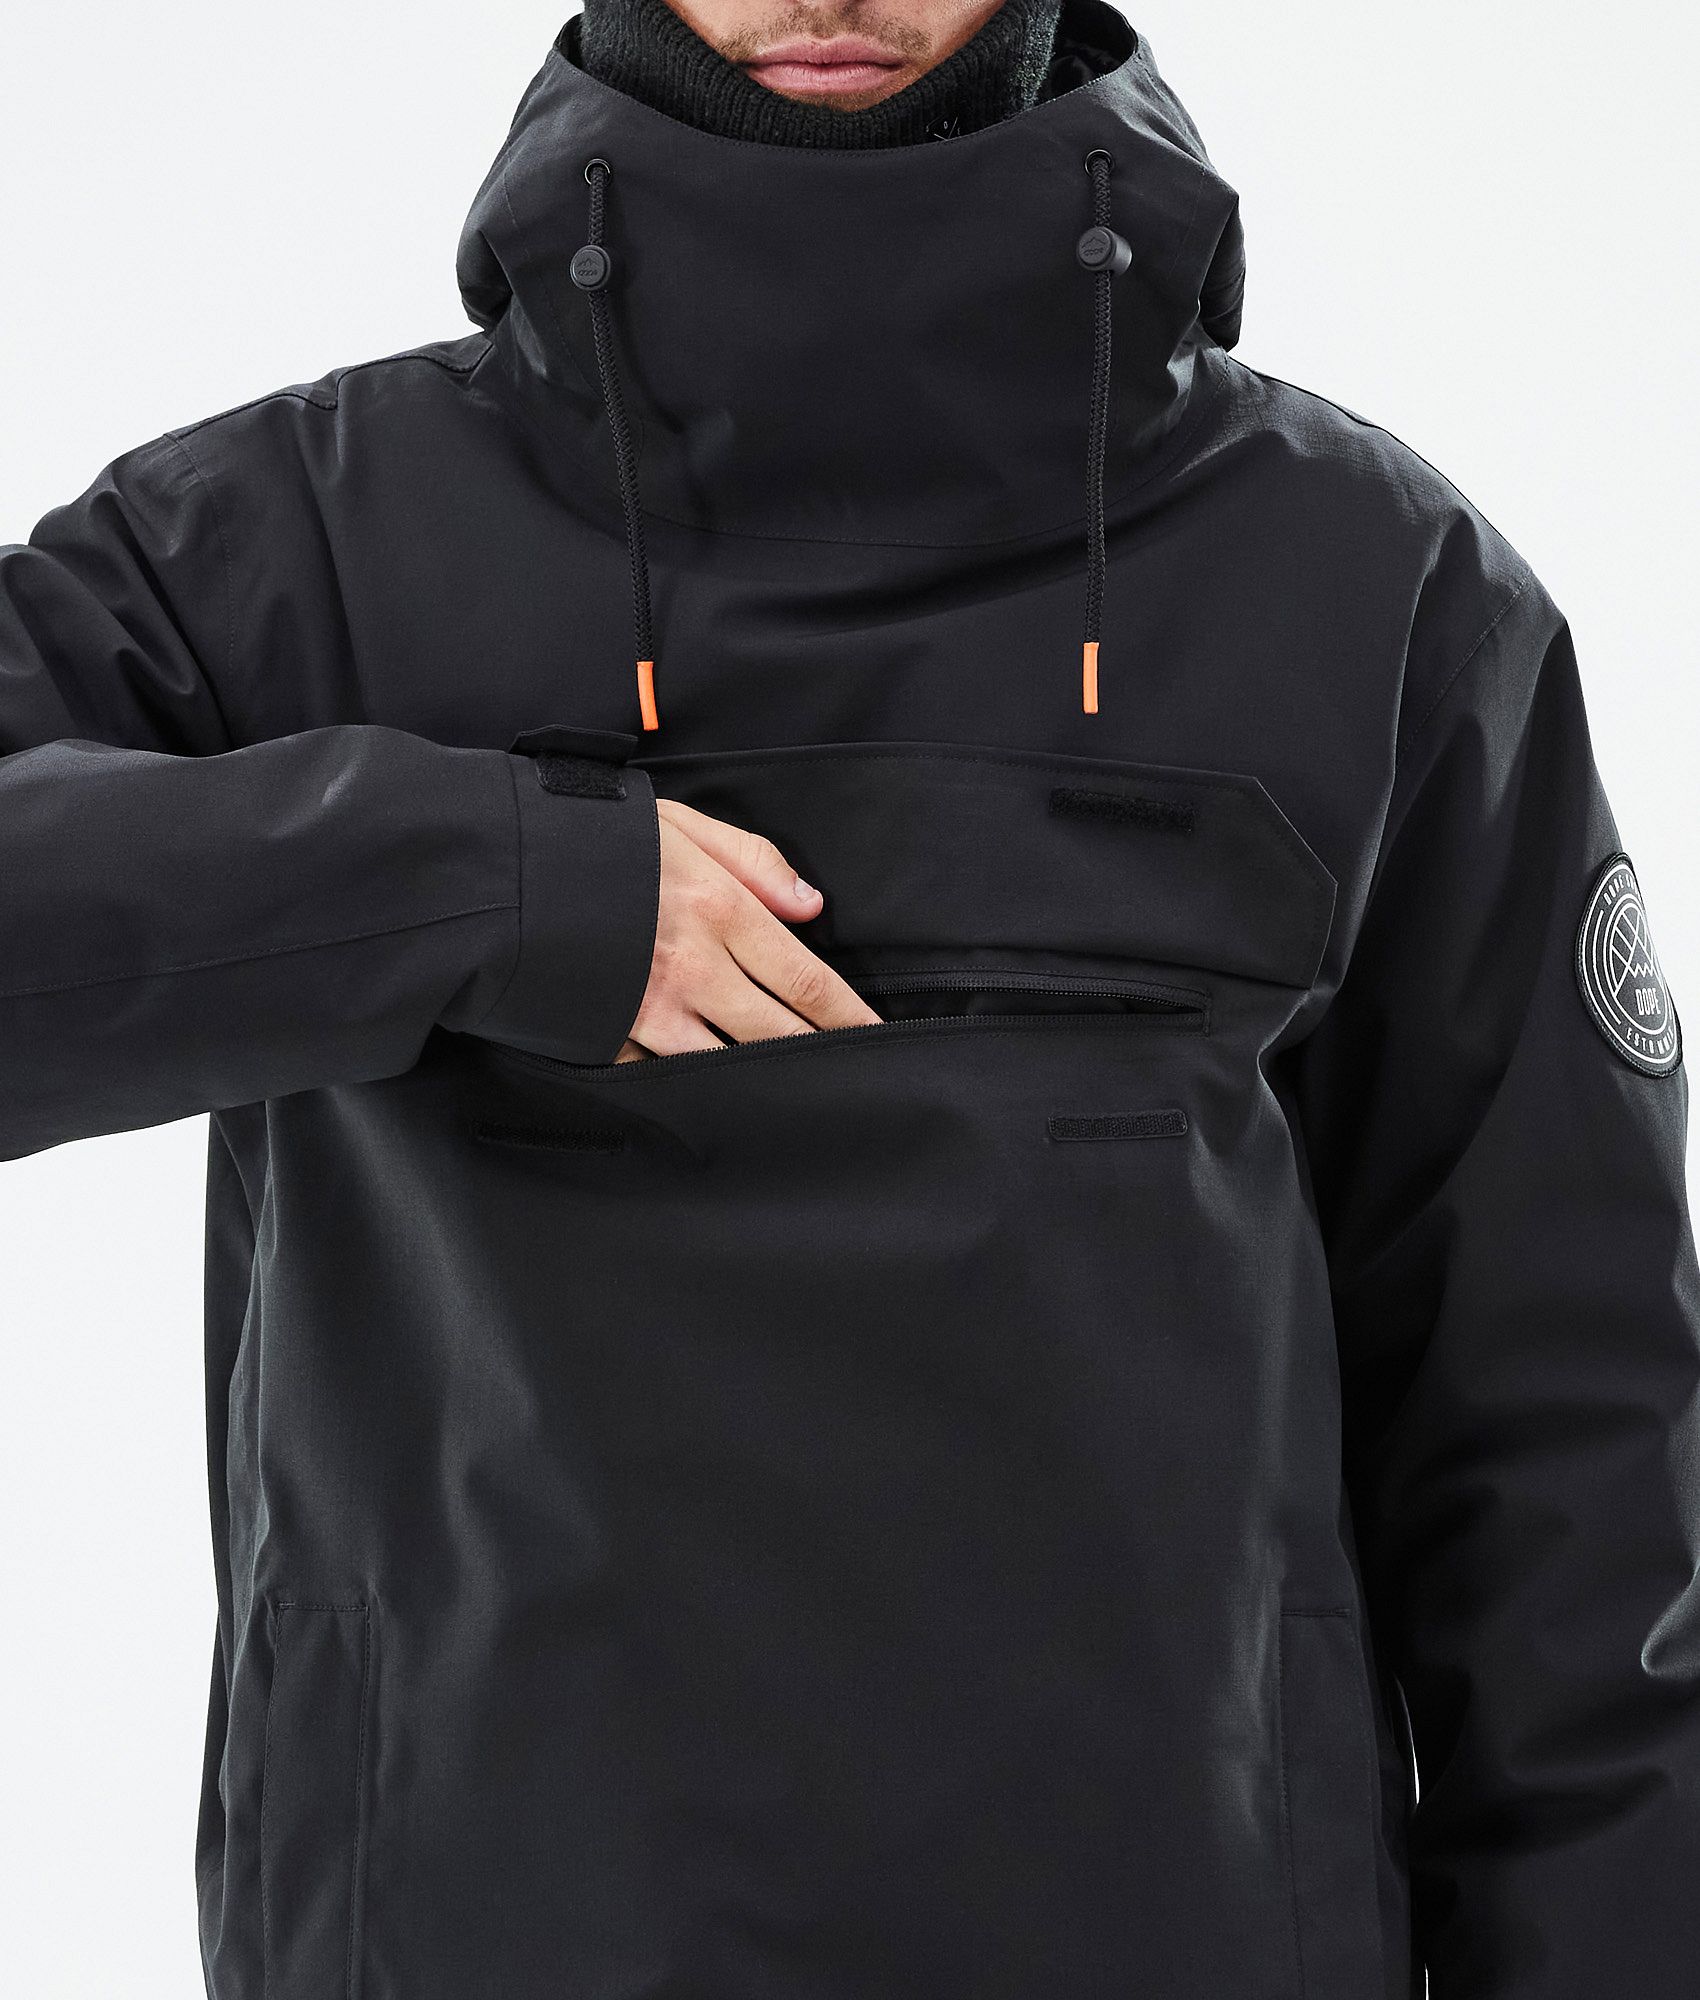 Men's ski jacket with Clima Protect